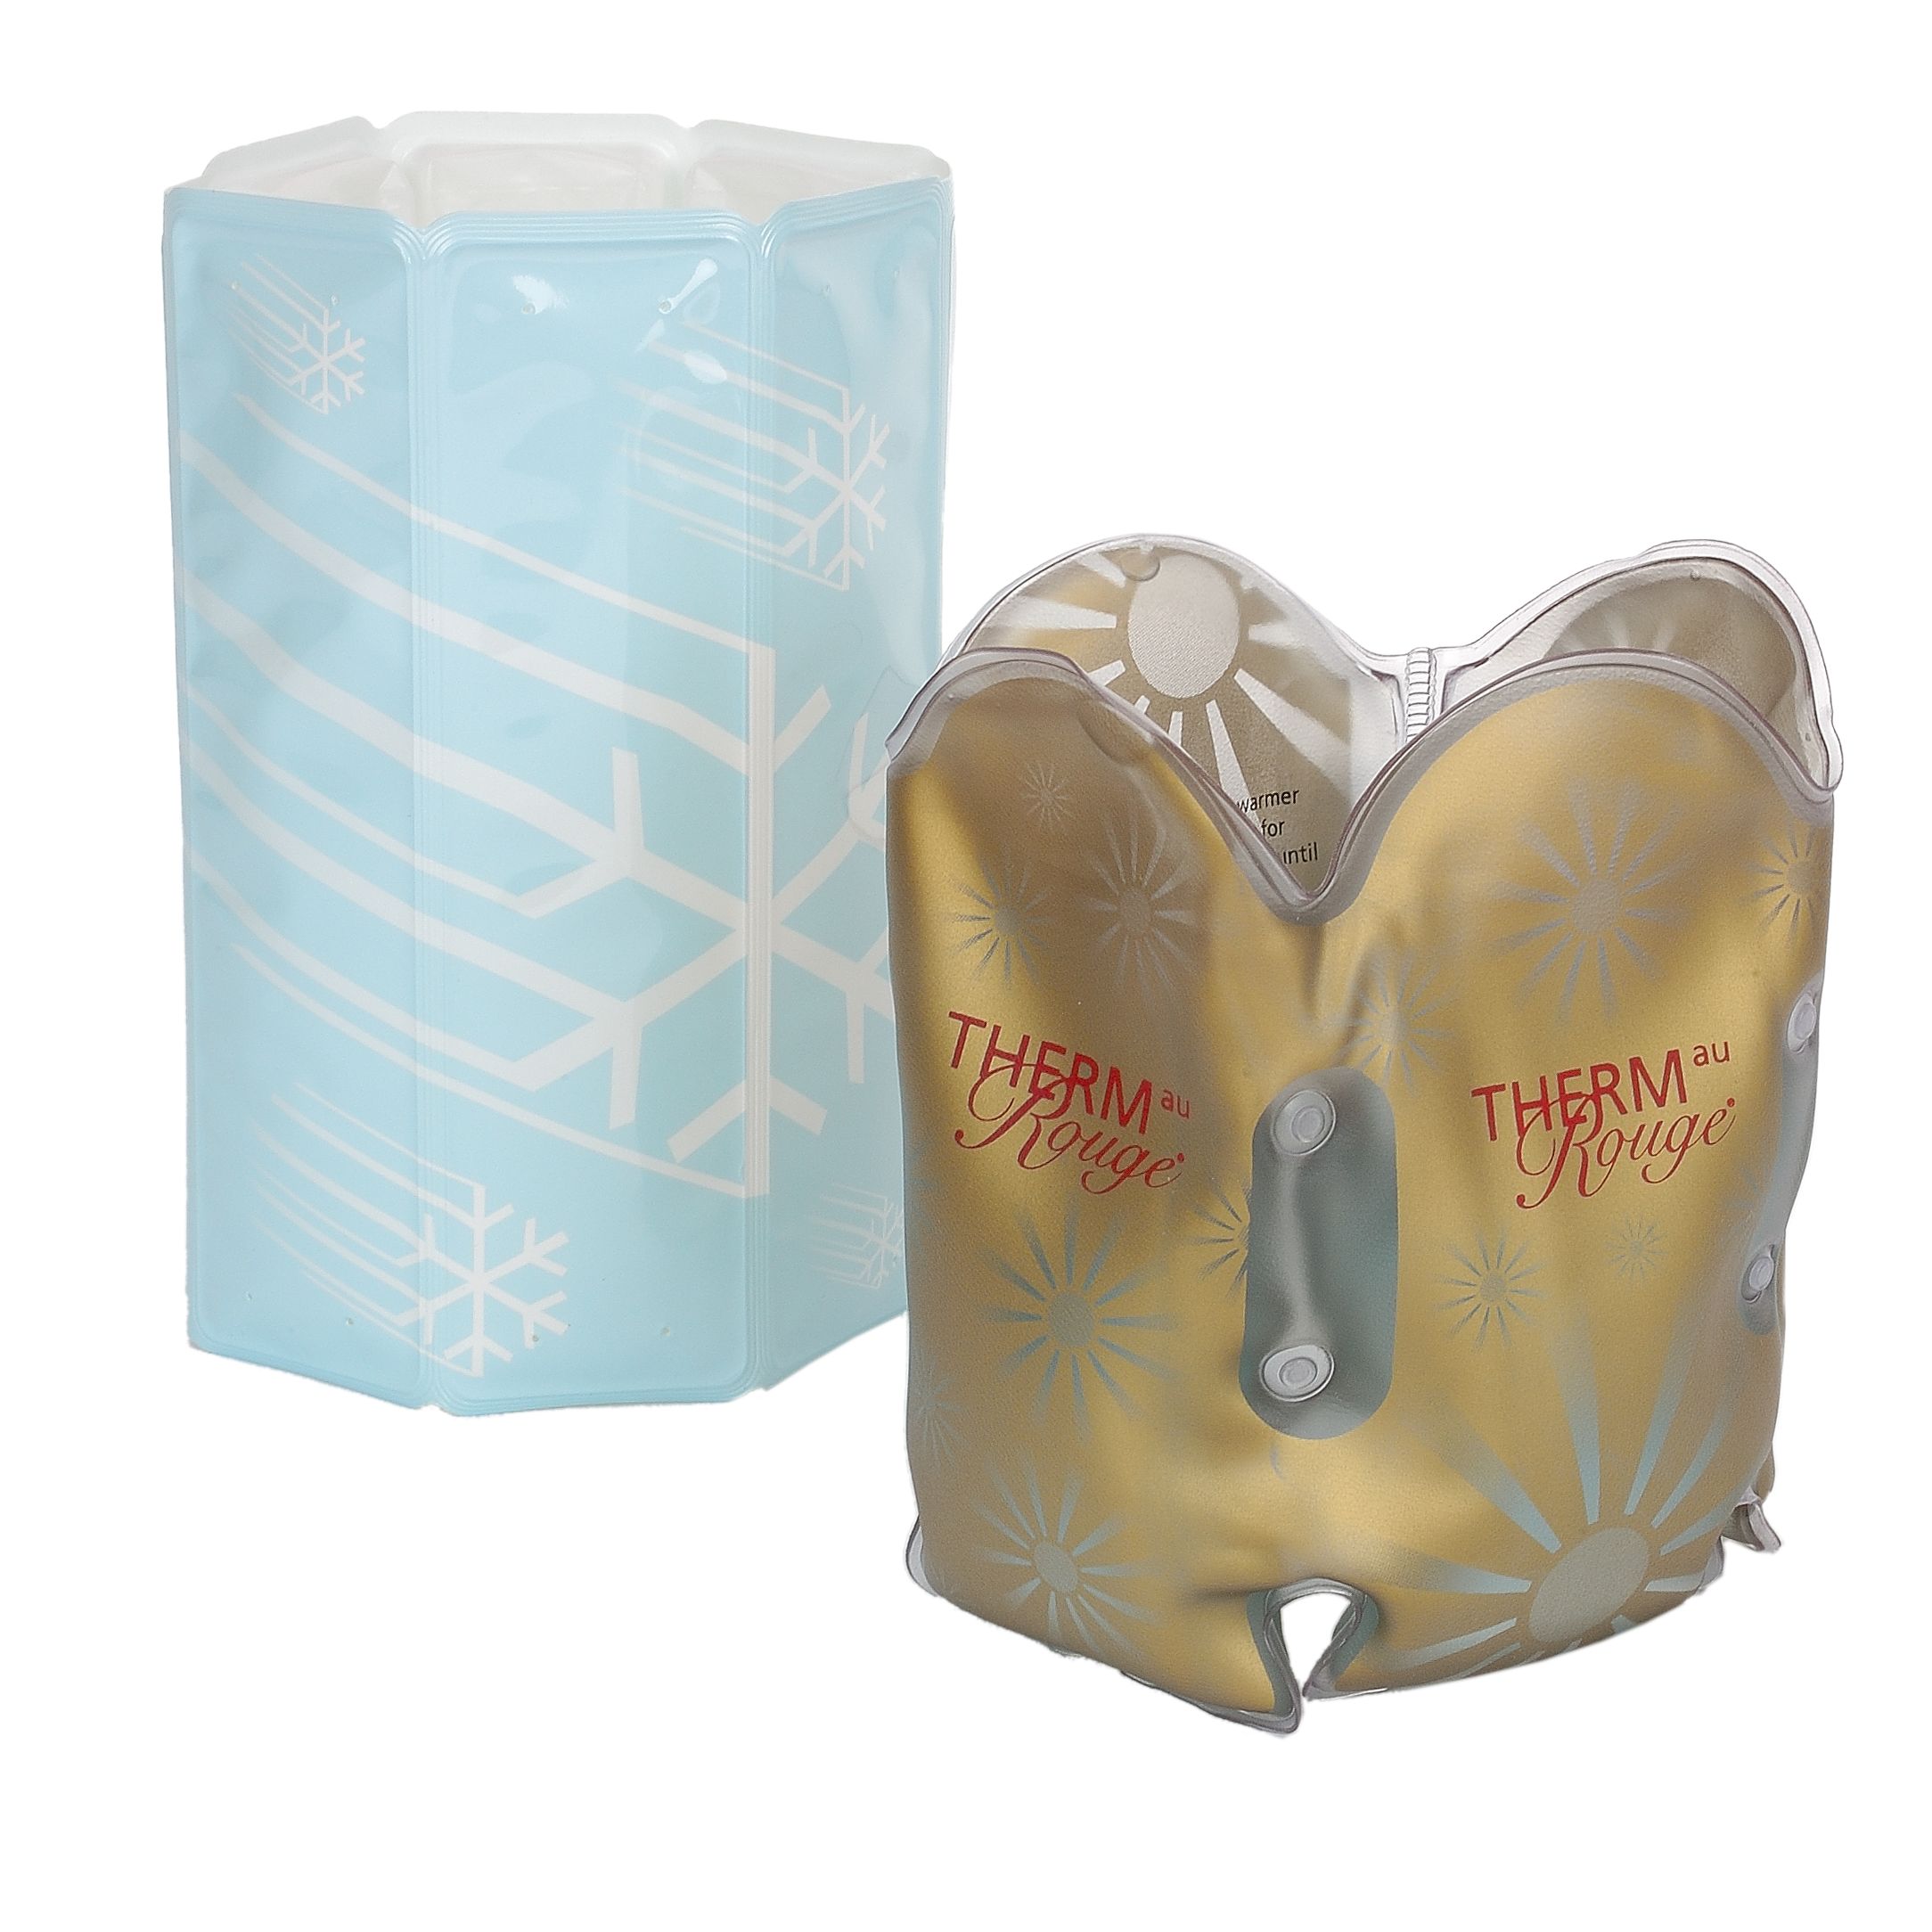 Therm au Rouge / Rapid Ice Gift Set